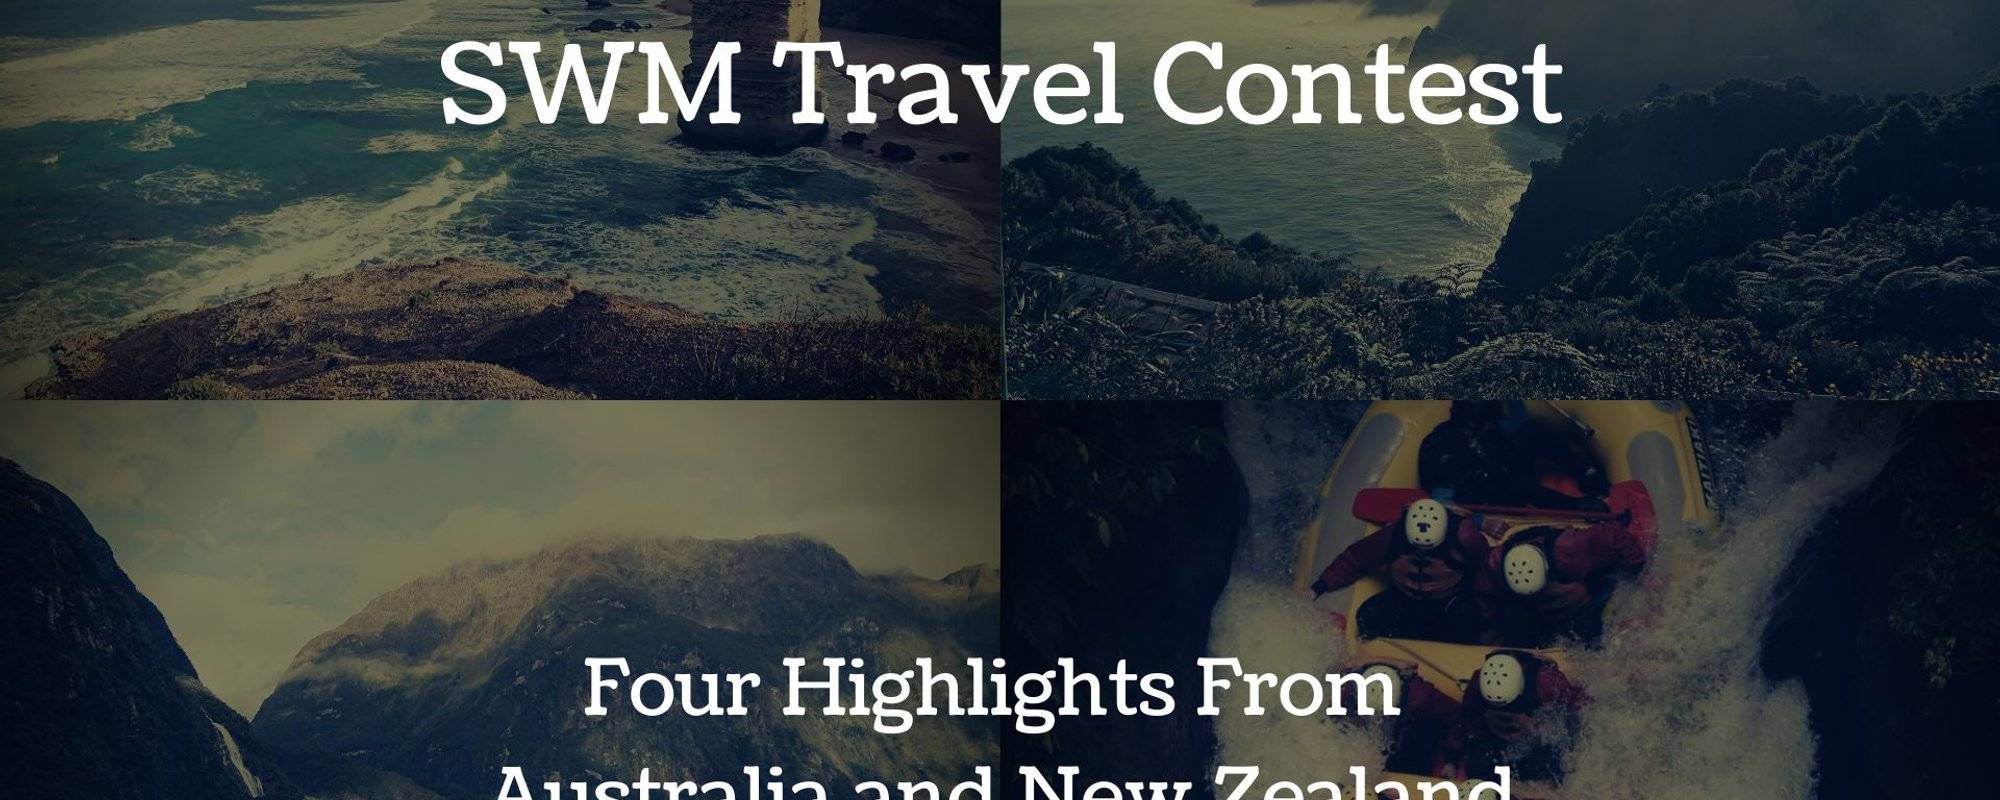 Haveyoubeenhere 2019 Steemitworldmap Travel Contest - Four Highlights From Australia and New Zealand